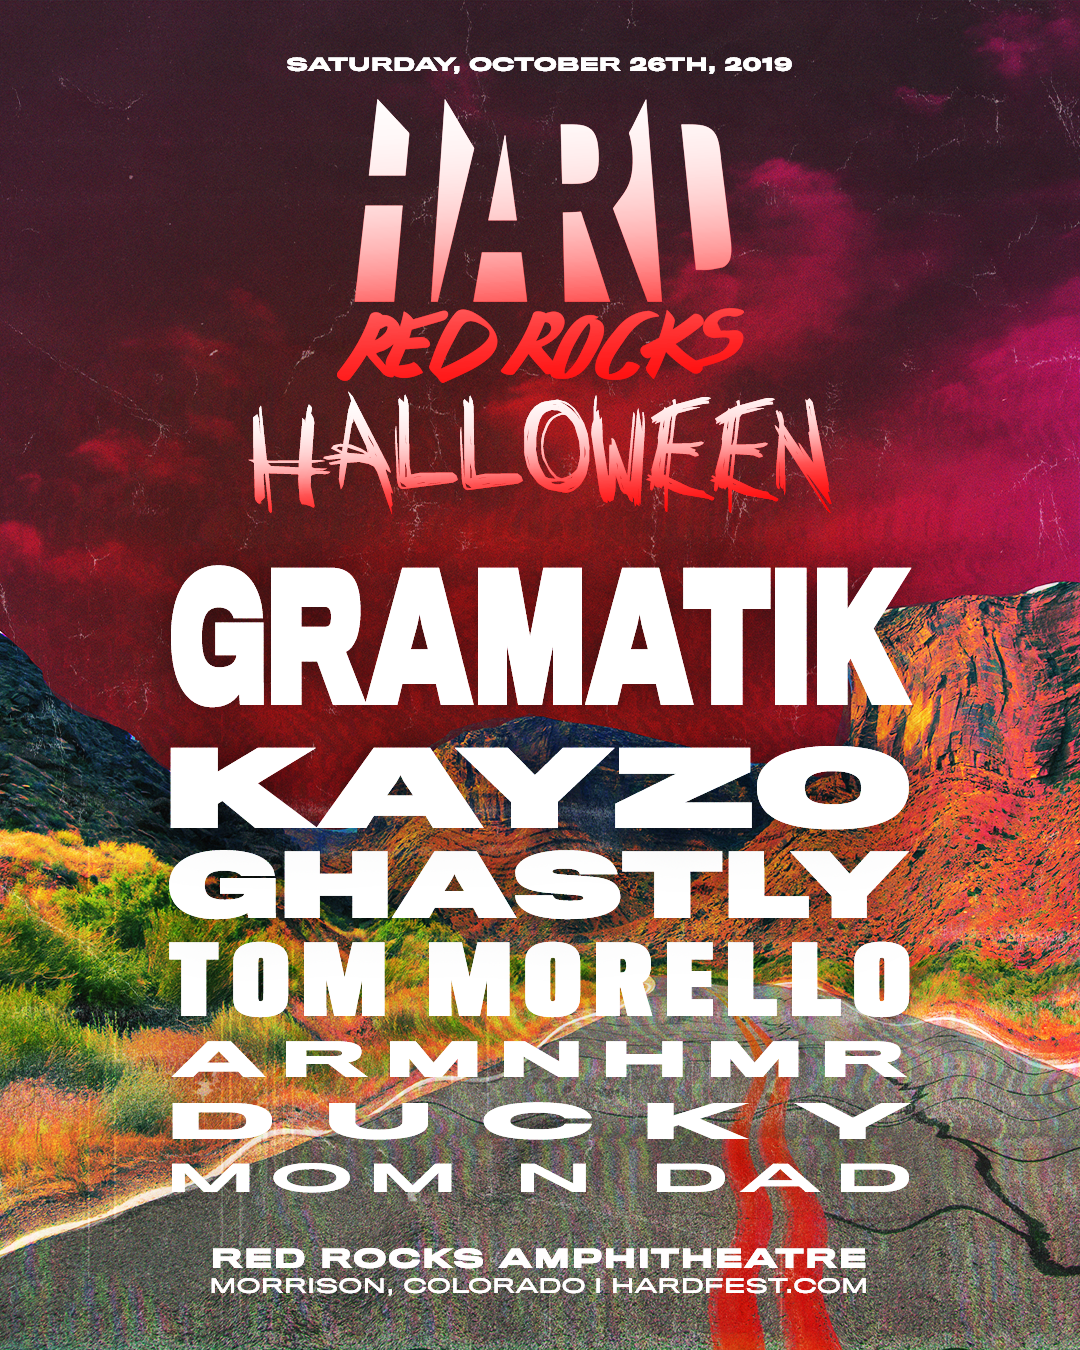 HARD Red Rocks Returns Halloween Weekend With Another Stacked Lineup